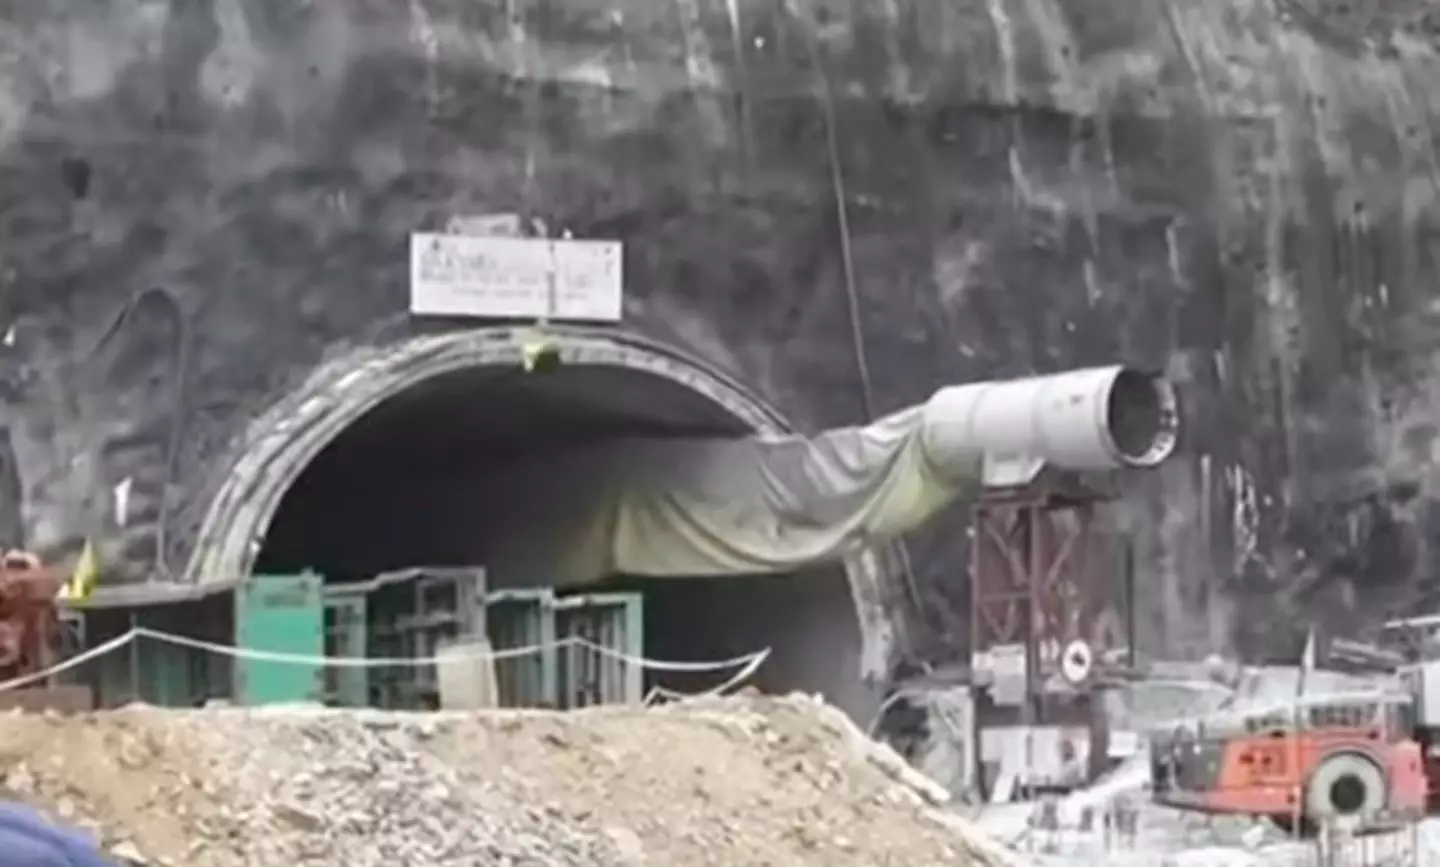 The tunnel collapsed while laborers were constructing it.